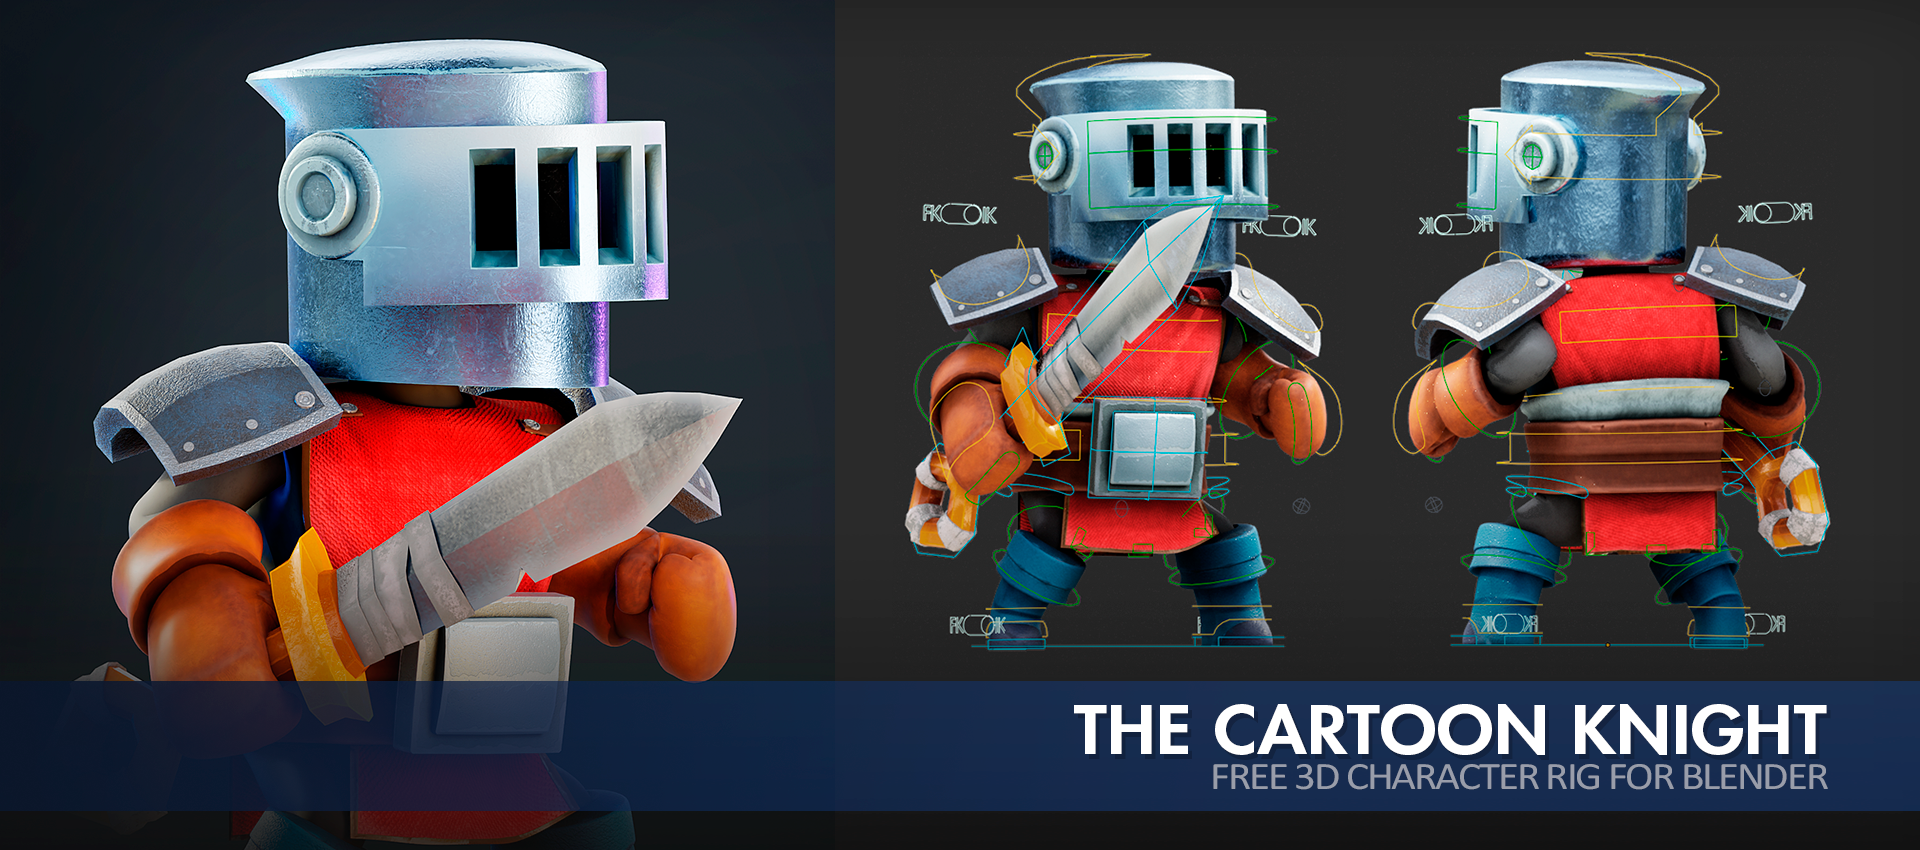 The Cartoon Knight! preview image 2